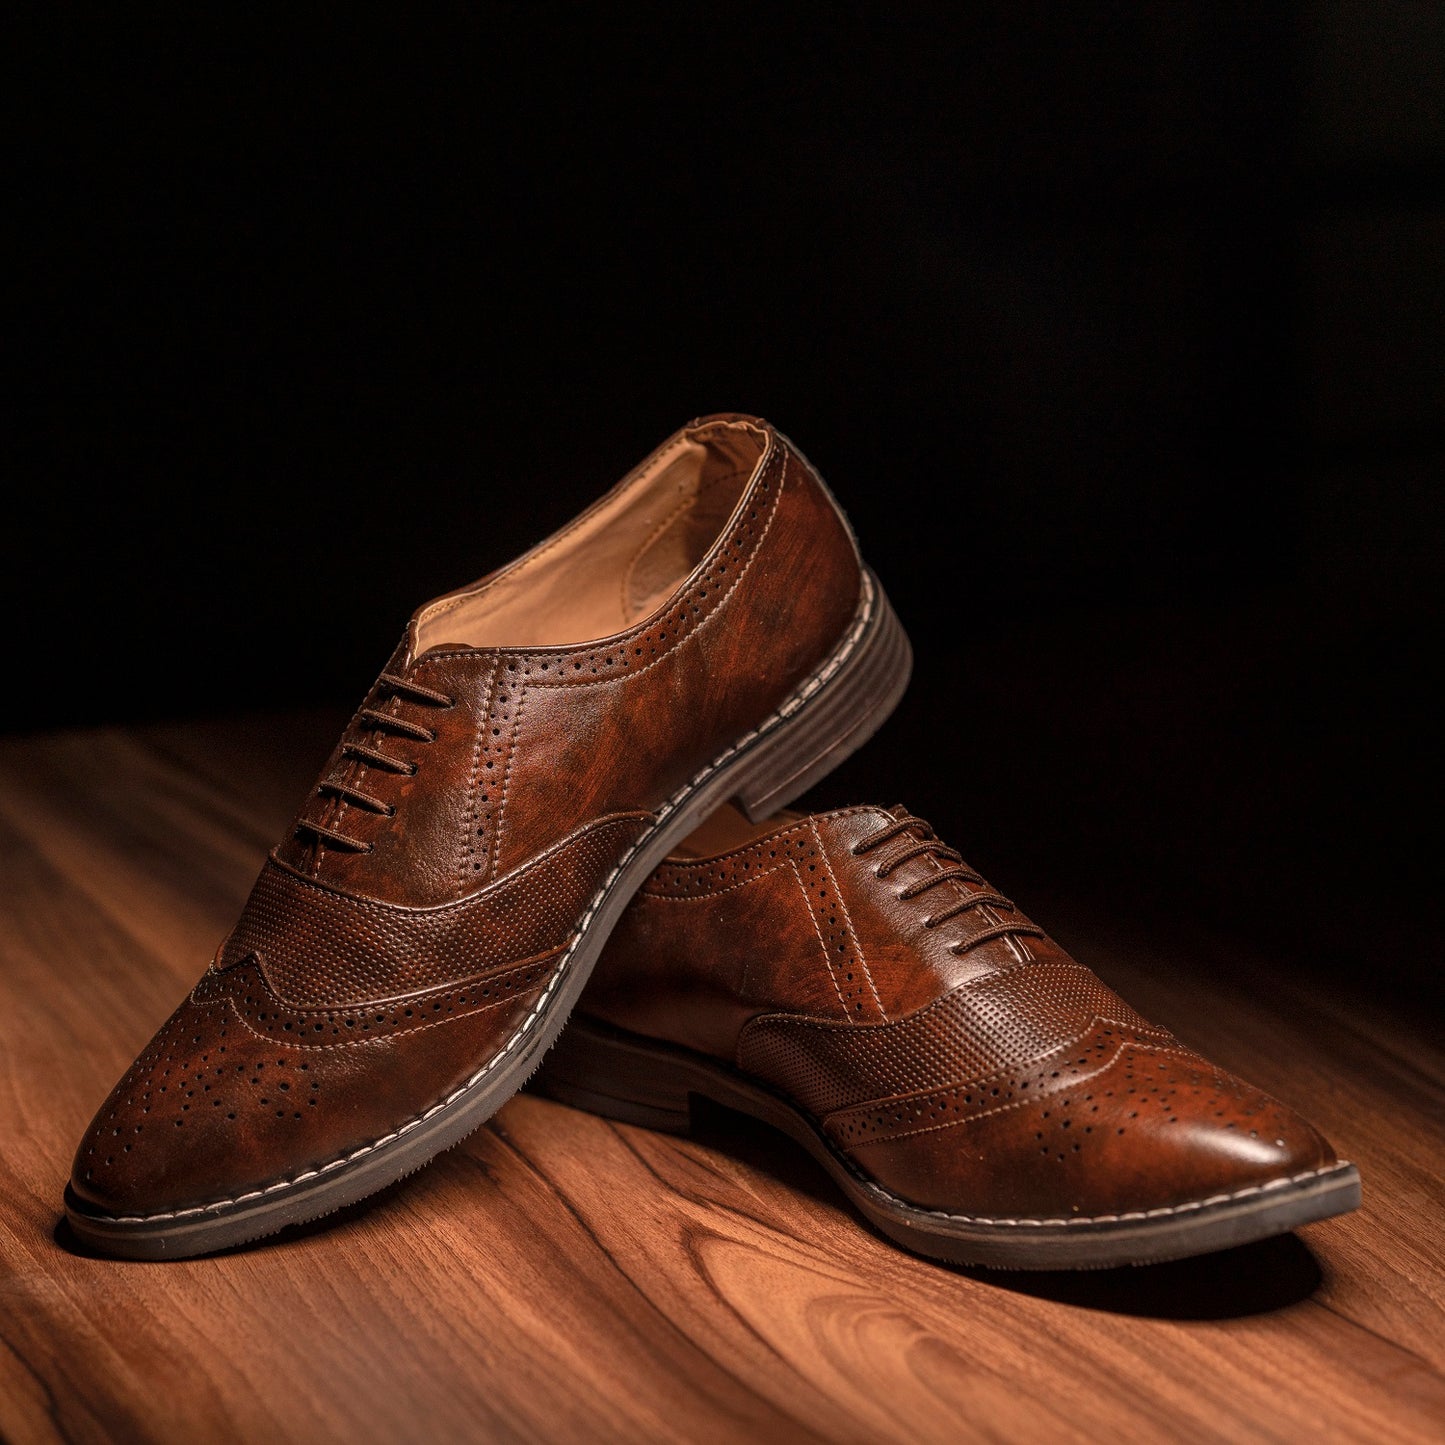 The Aurous Rio Laceup Formal Brogues With Wingtips